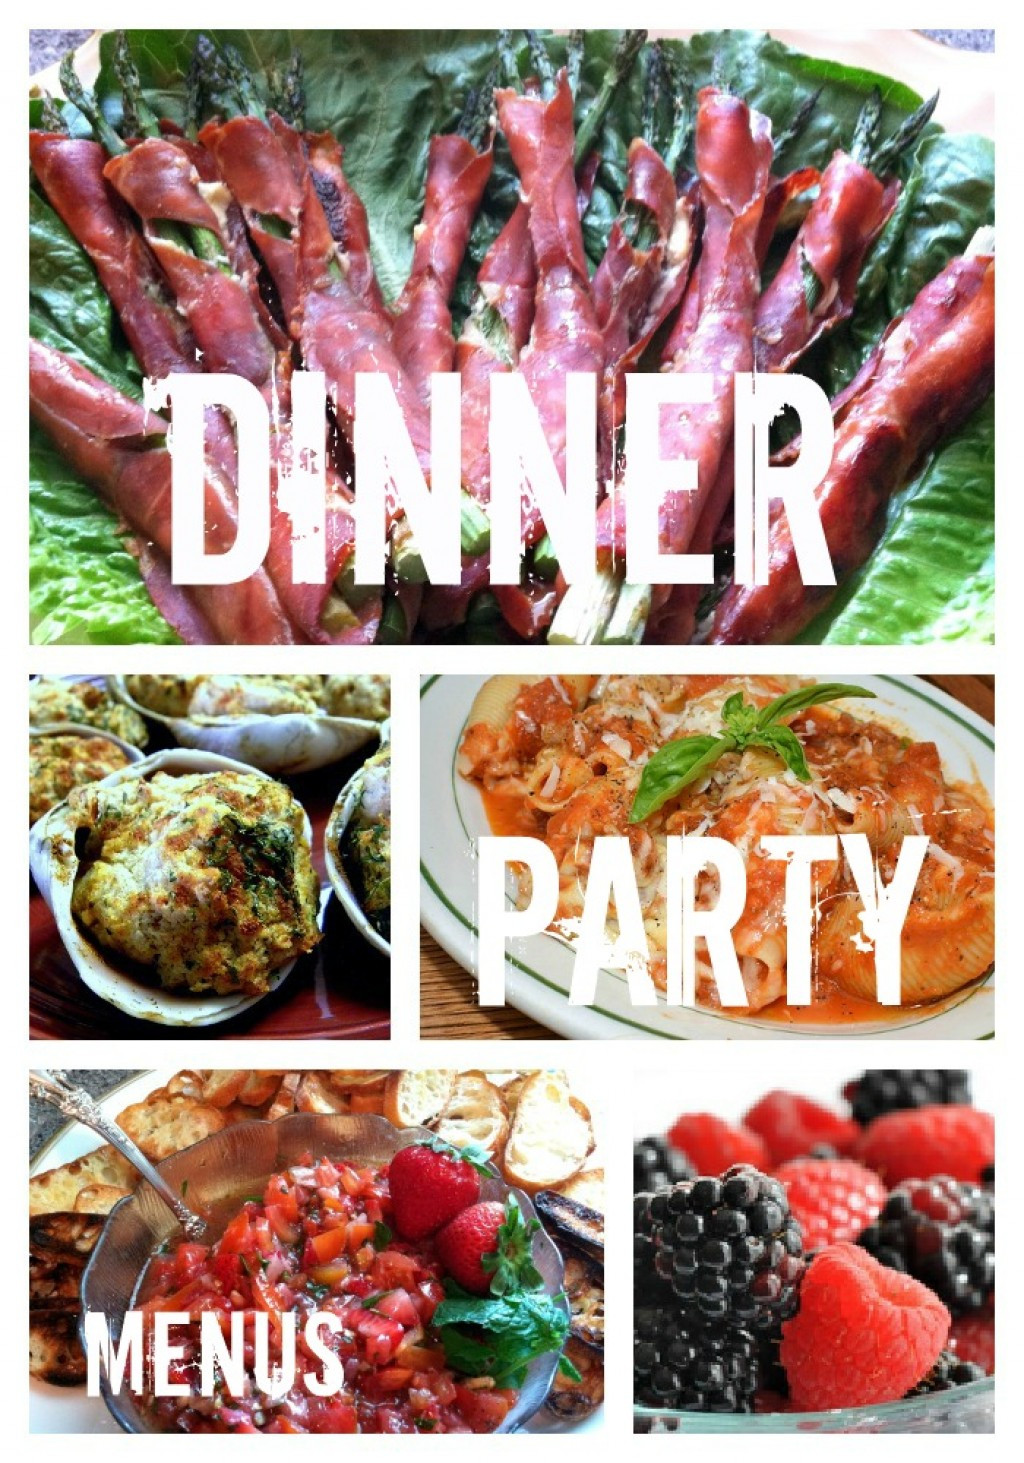 Top 24 Menu Ideas for A Birthday Dinner Party - Home, Family, Style and